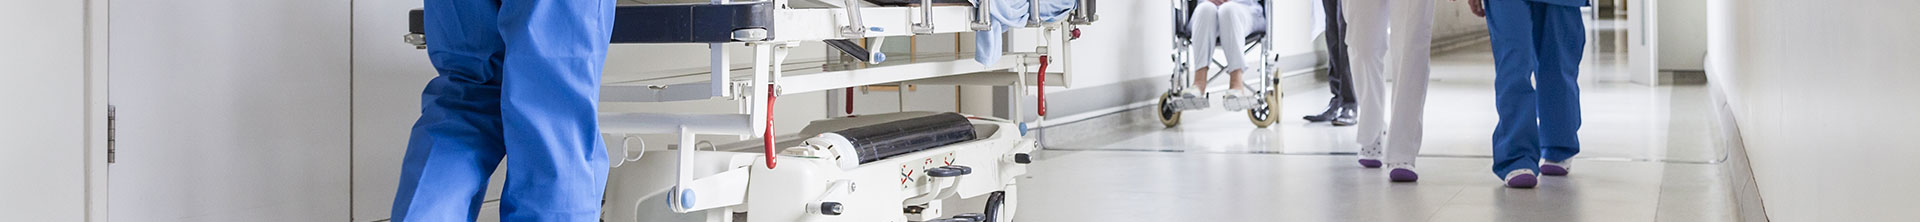 Tennant Floor Cleaning Solutions for the Healthcare Industry